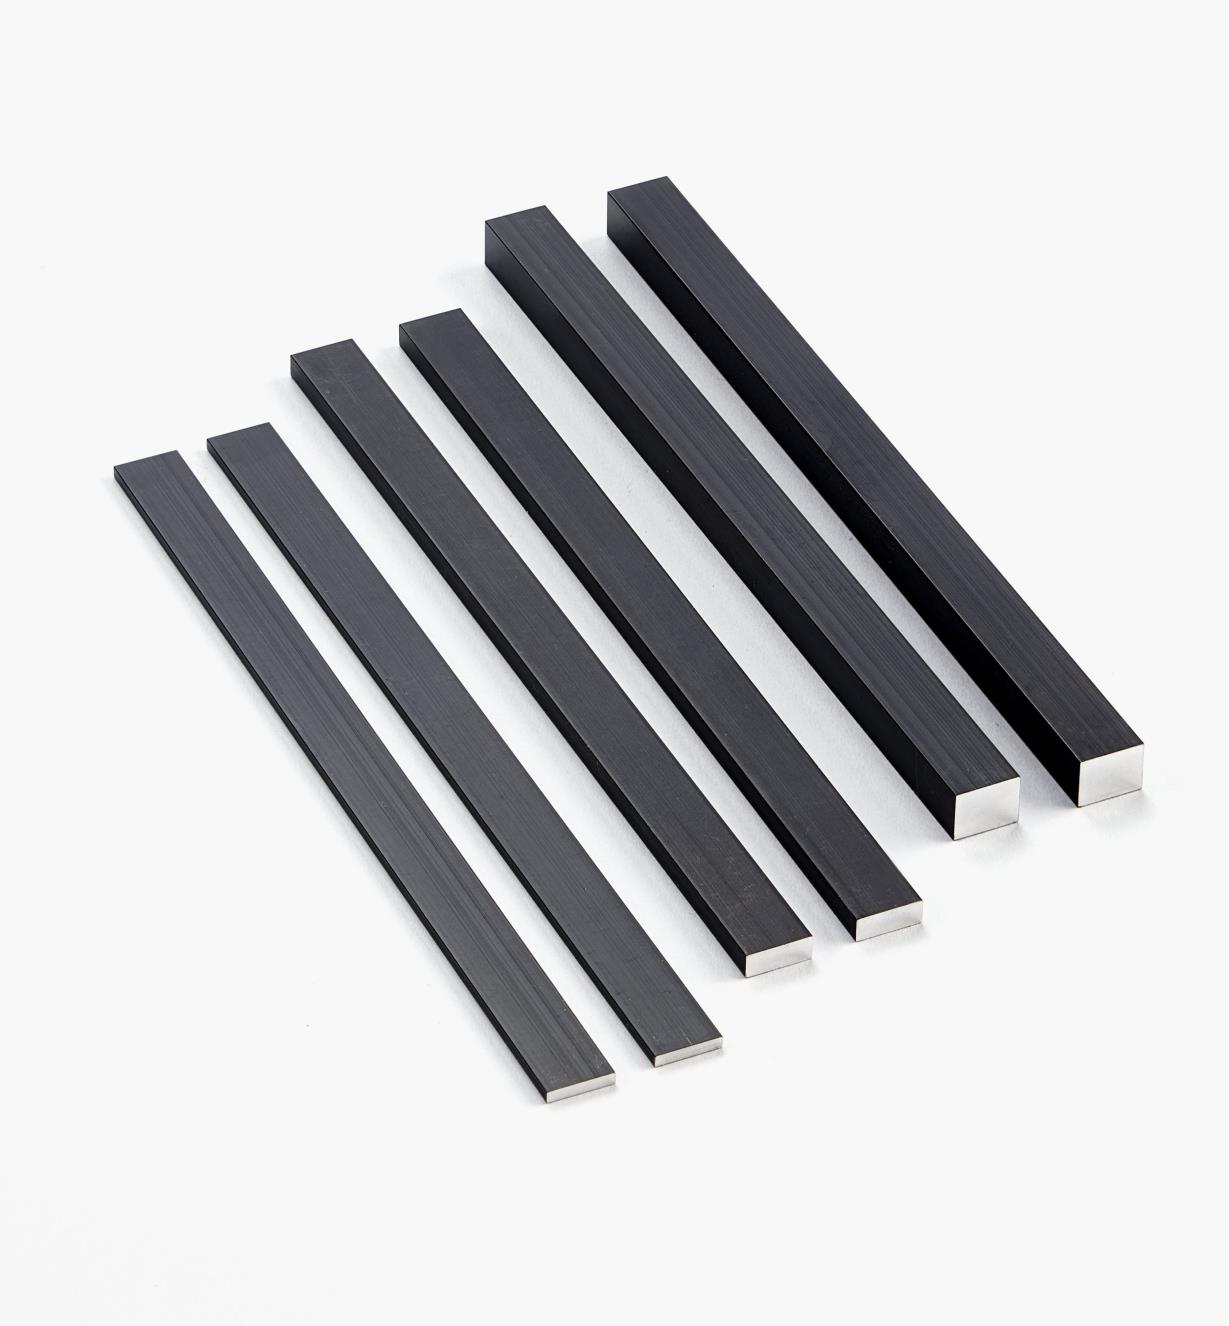 05J1702 - Set of 6 Shims for Veritas Domino Joinery Table